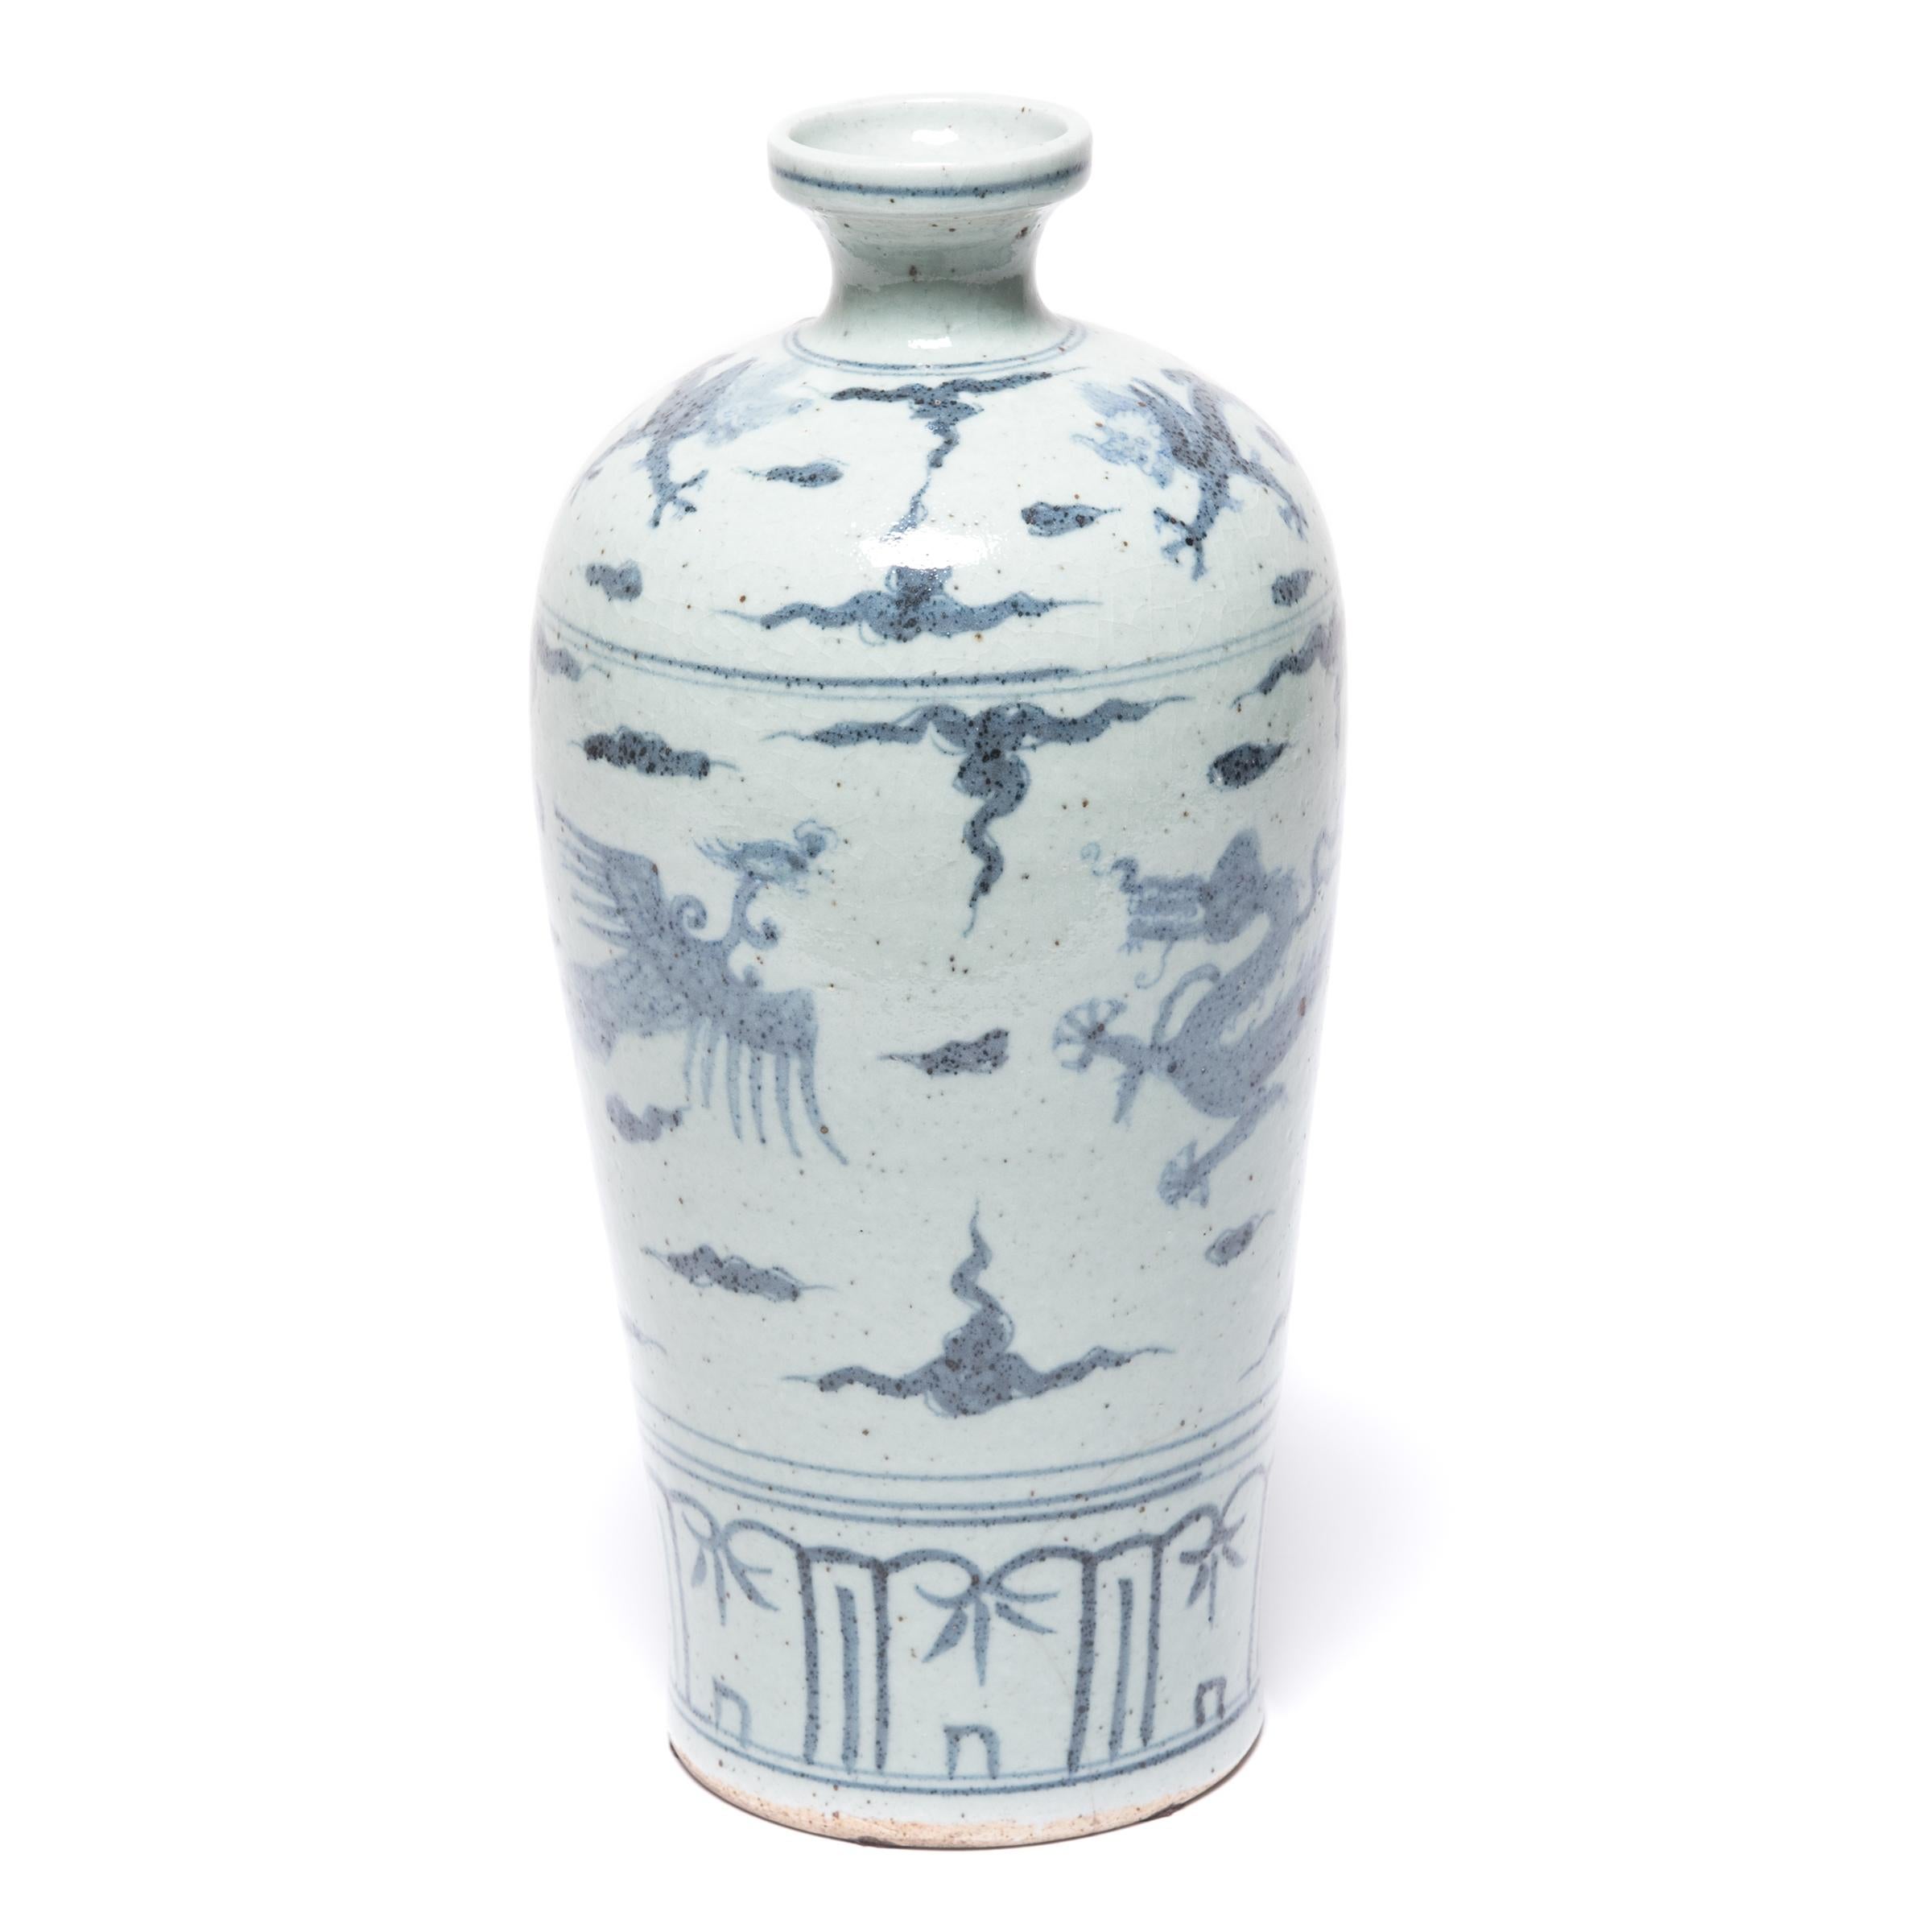 Chinese blue and white porcelain has inspired ceramists worldwide since cobalt was first introduced to China from the Middle East thousands of years ago. This contemporary version of a Classic vase made in Beijing province showcases the traditional